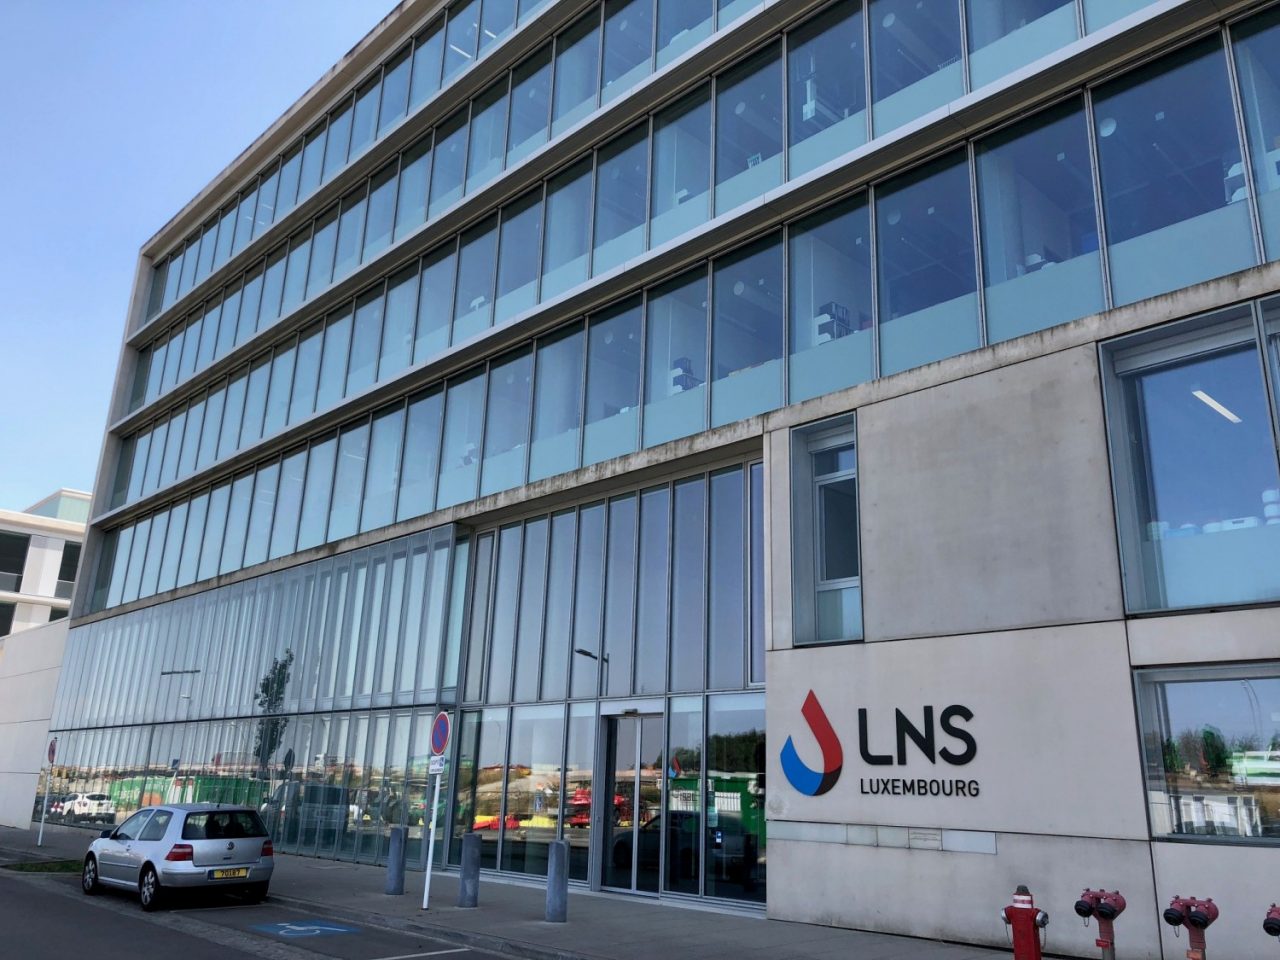 LNS becomes one of the main public health microbiology hubs in Europe